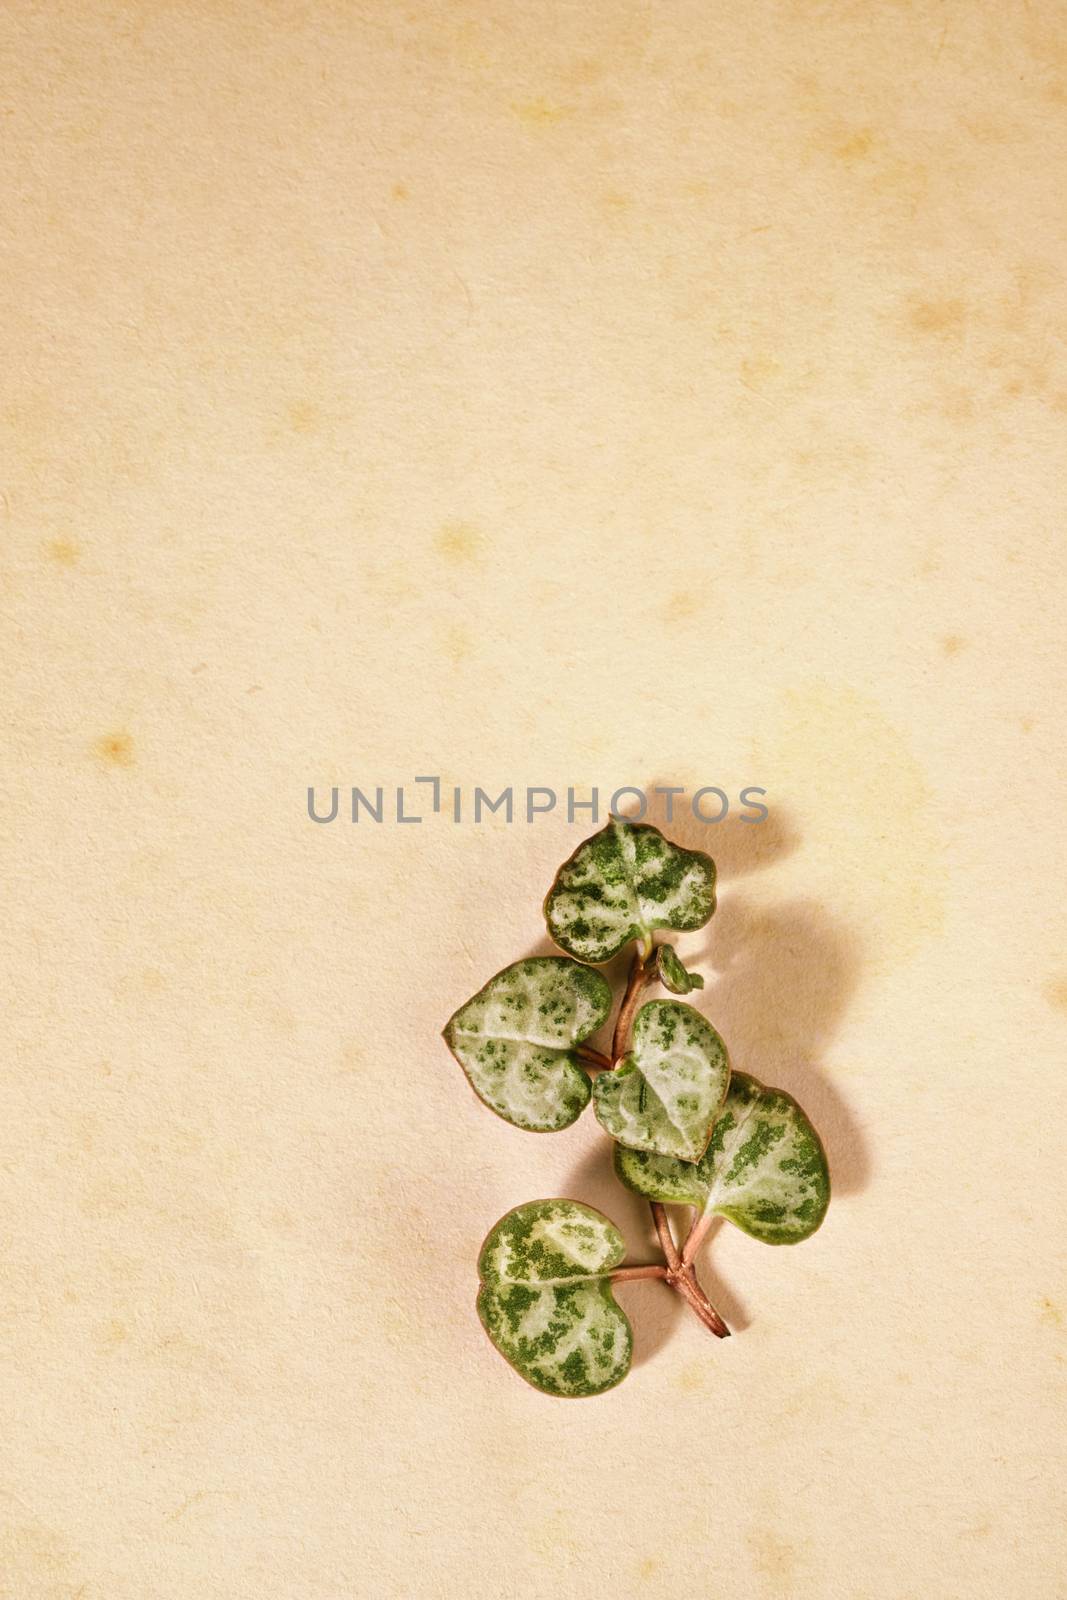 Fresh  twig of ceropegia plant on old and stained paper  , beautiful green and purple leaves  shaped like hearts make shadows on background